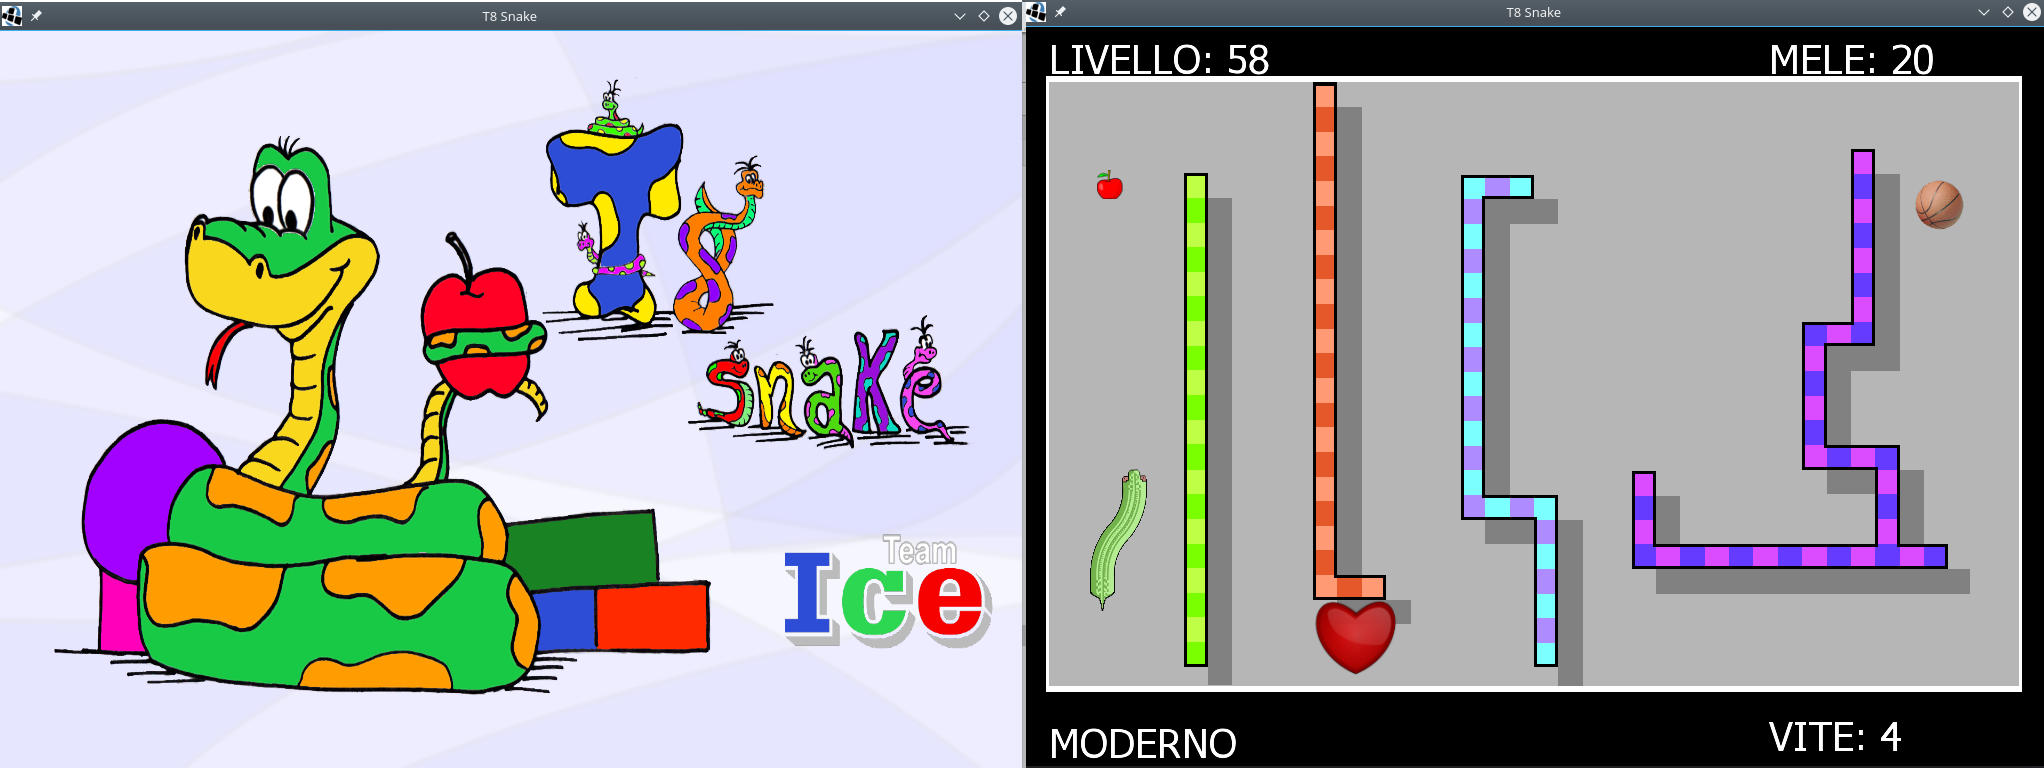 classic snake game mods